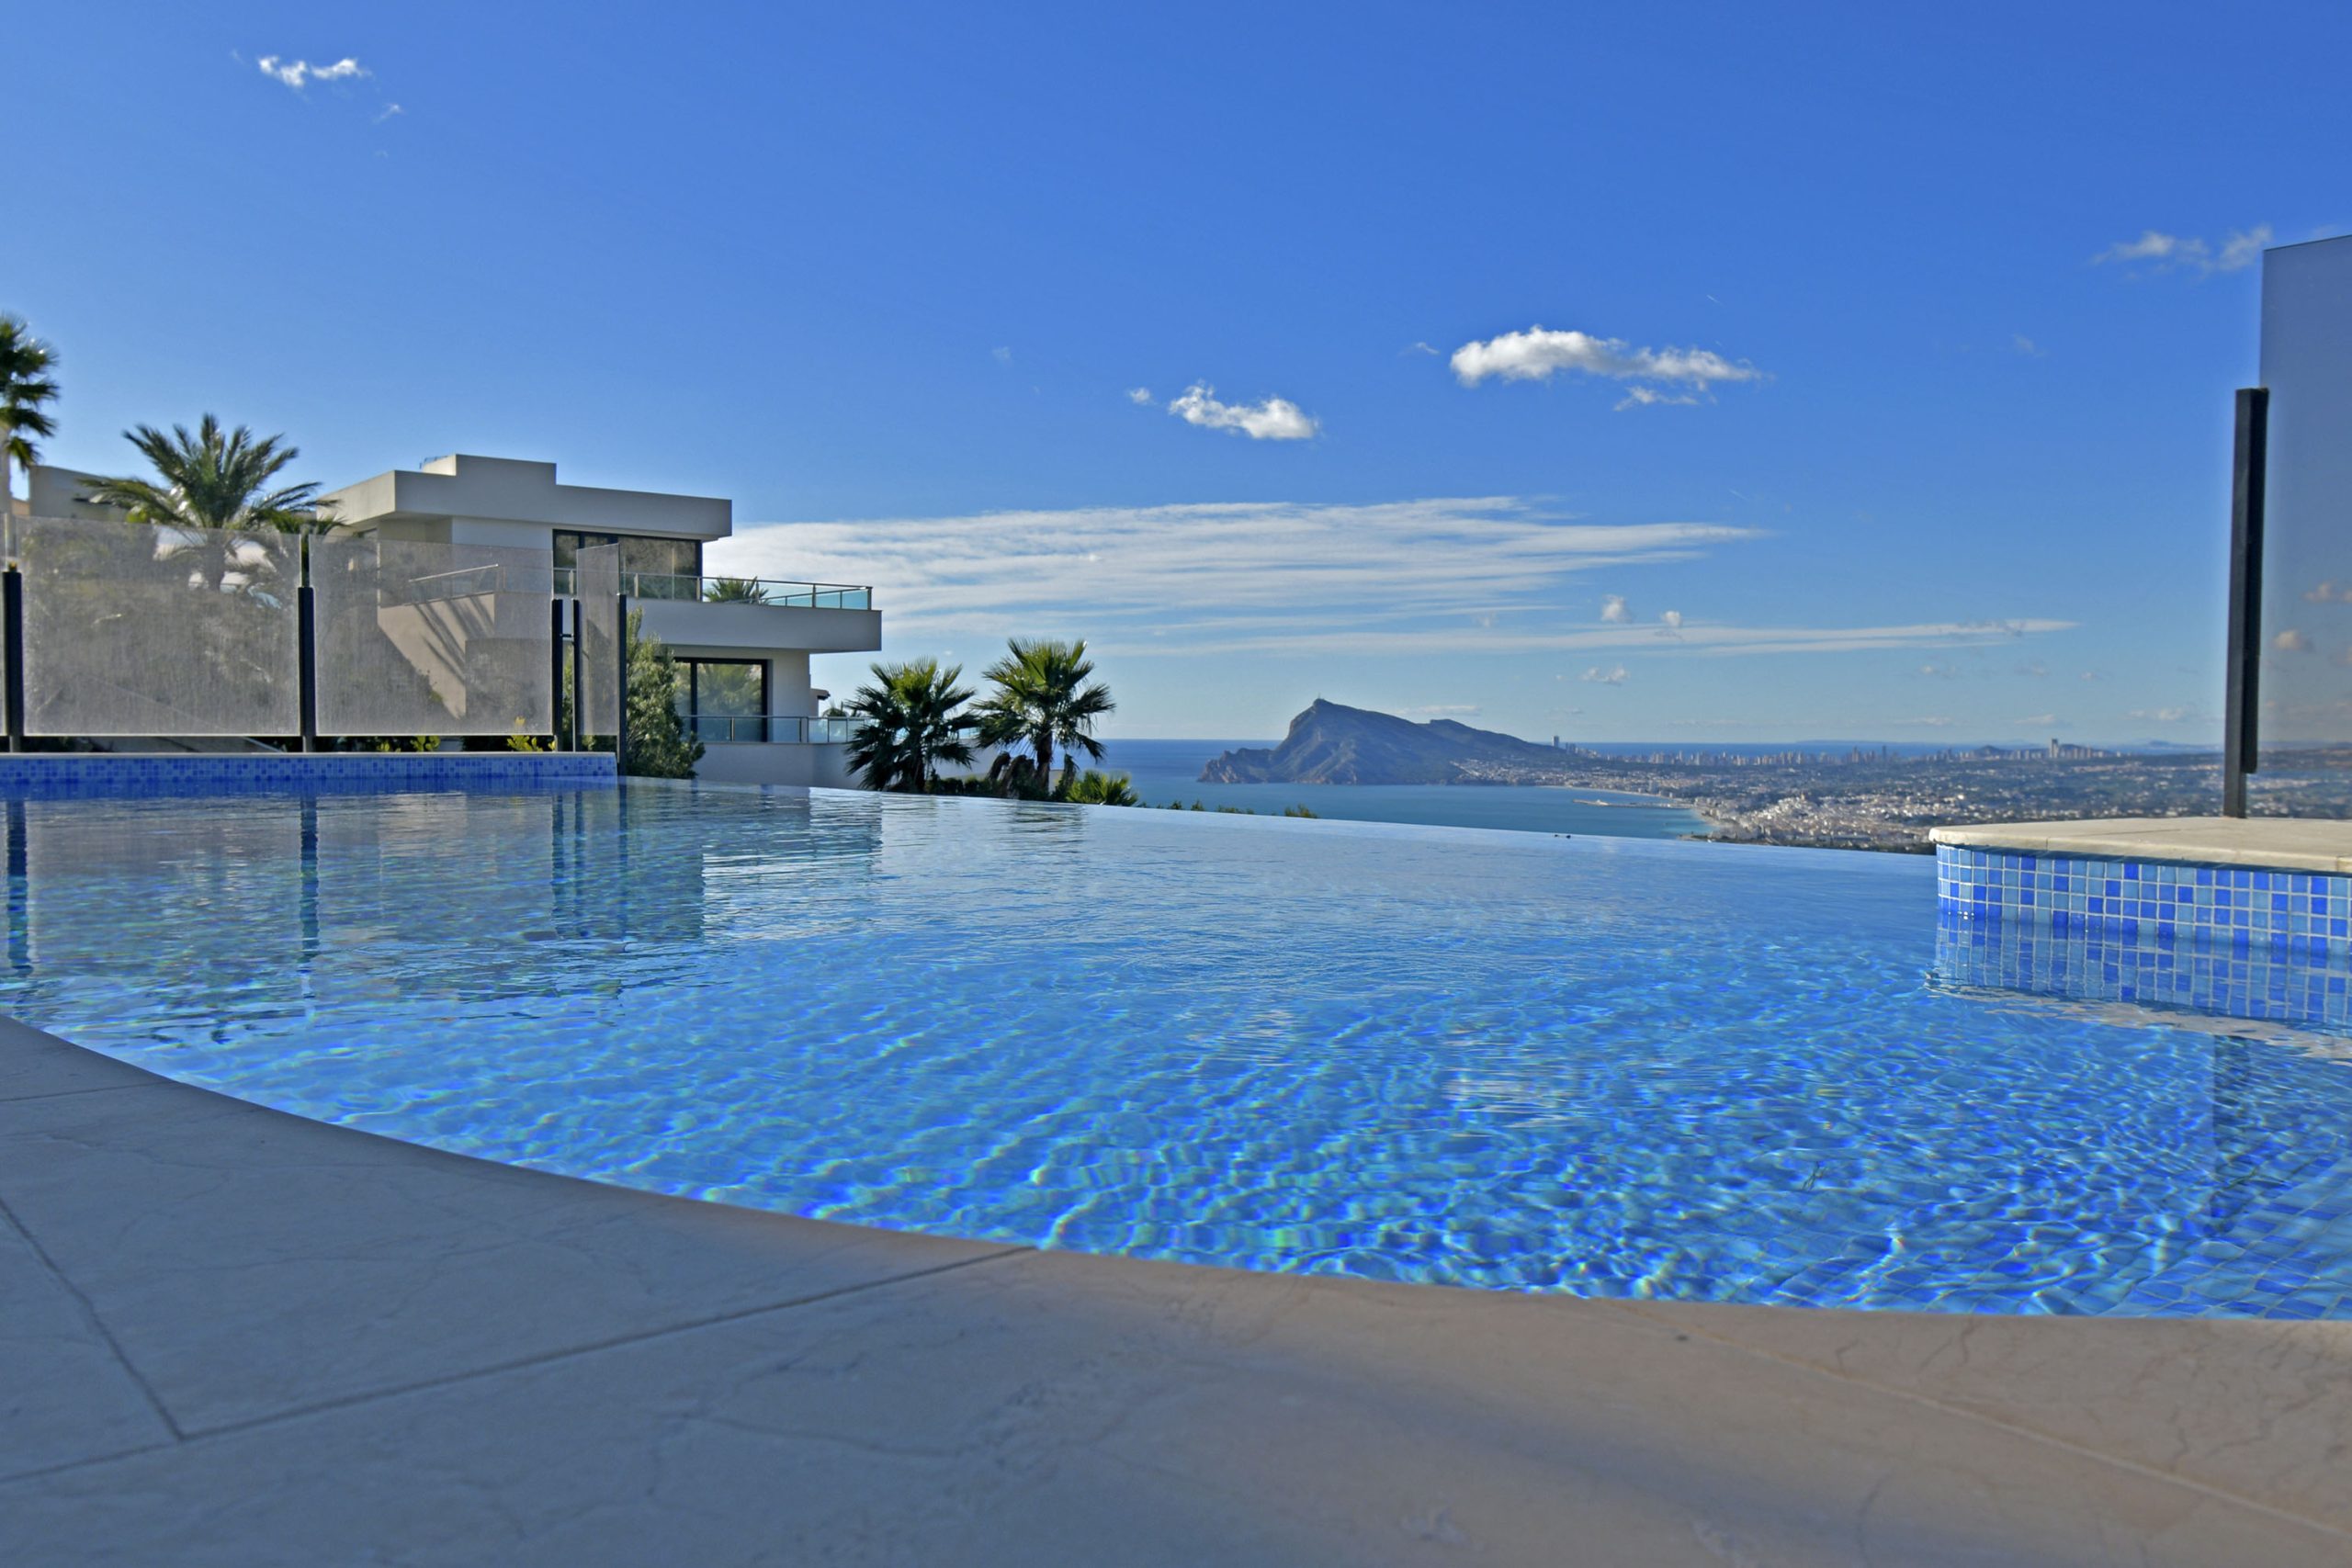 LUXURY VILLA IN ALTEA WITH PANORAMIC VIEWS